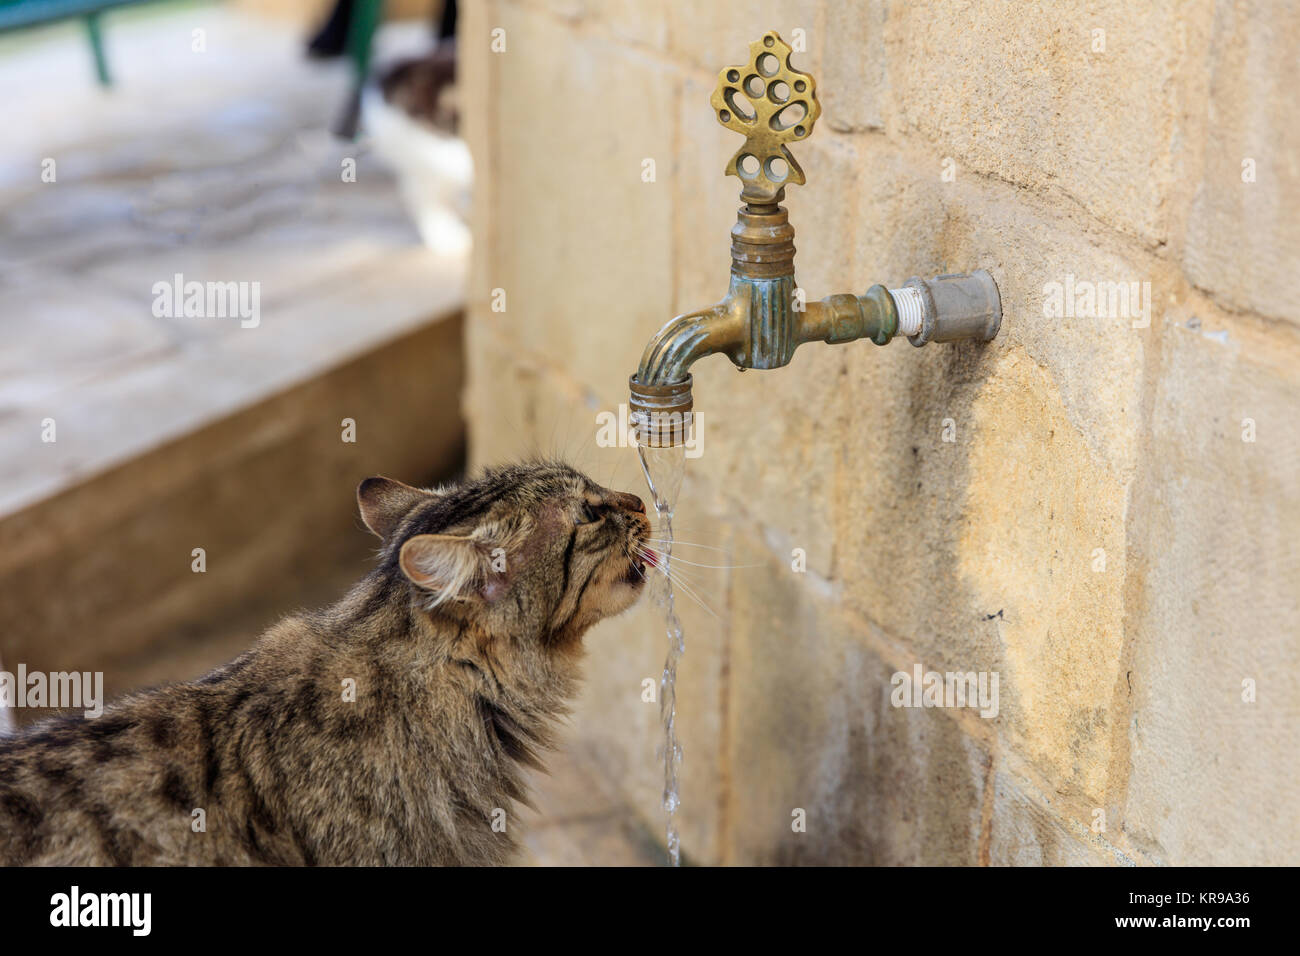 Cat colorful and thirsty is drinking water from a faucet. Blurred background. Close up view. Stock Photo